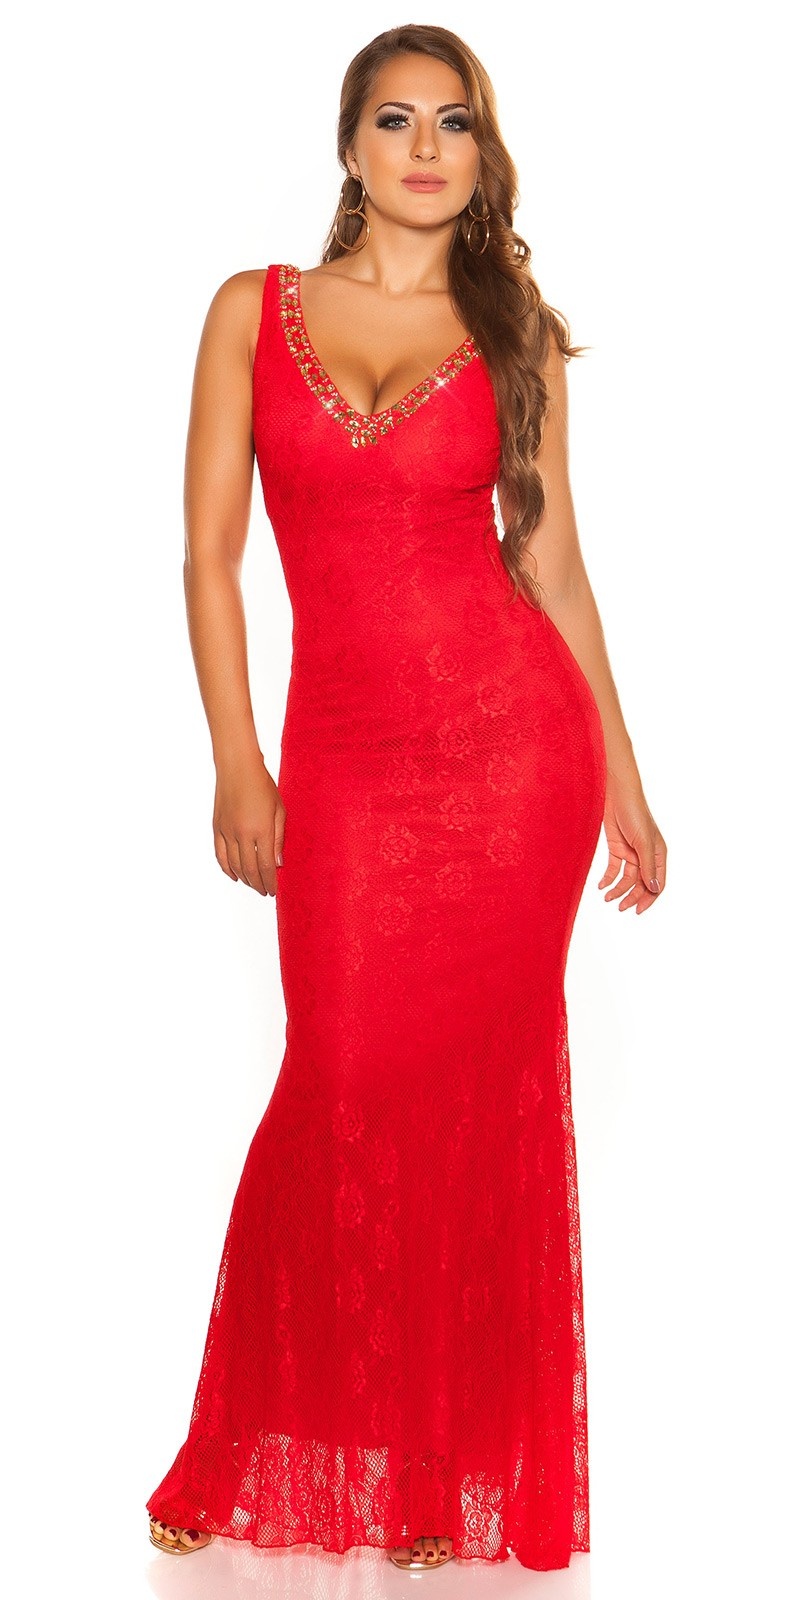 Red-Carpet-Look! Sexy KouCla Gown-eveningdress Red